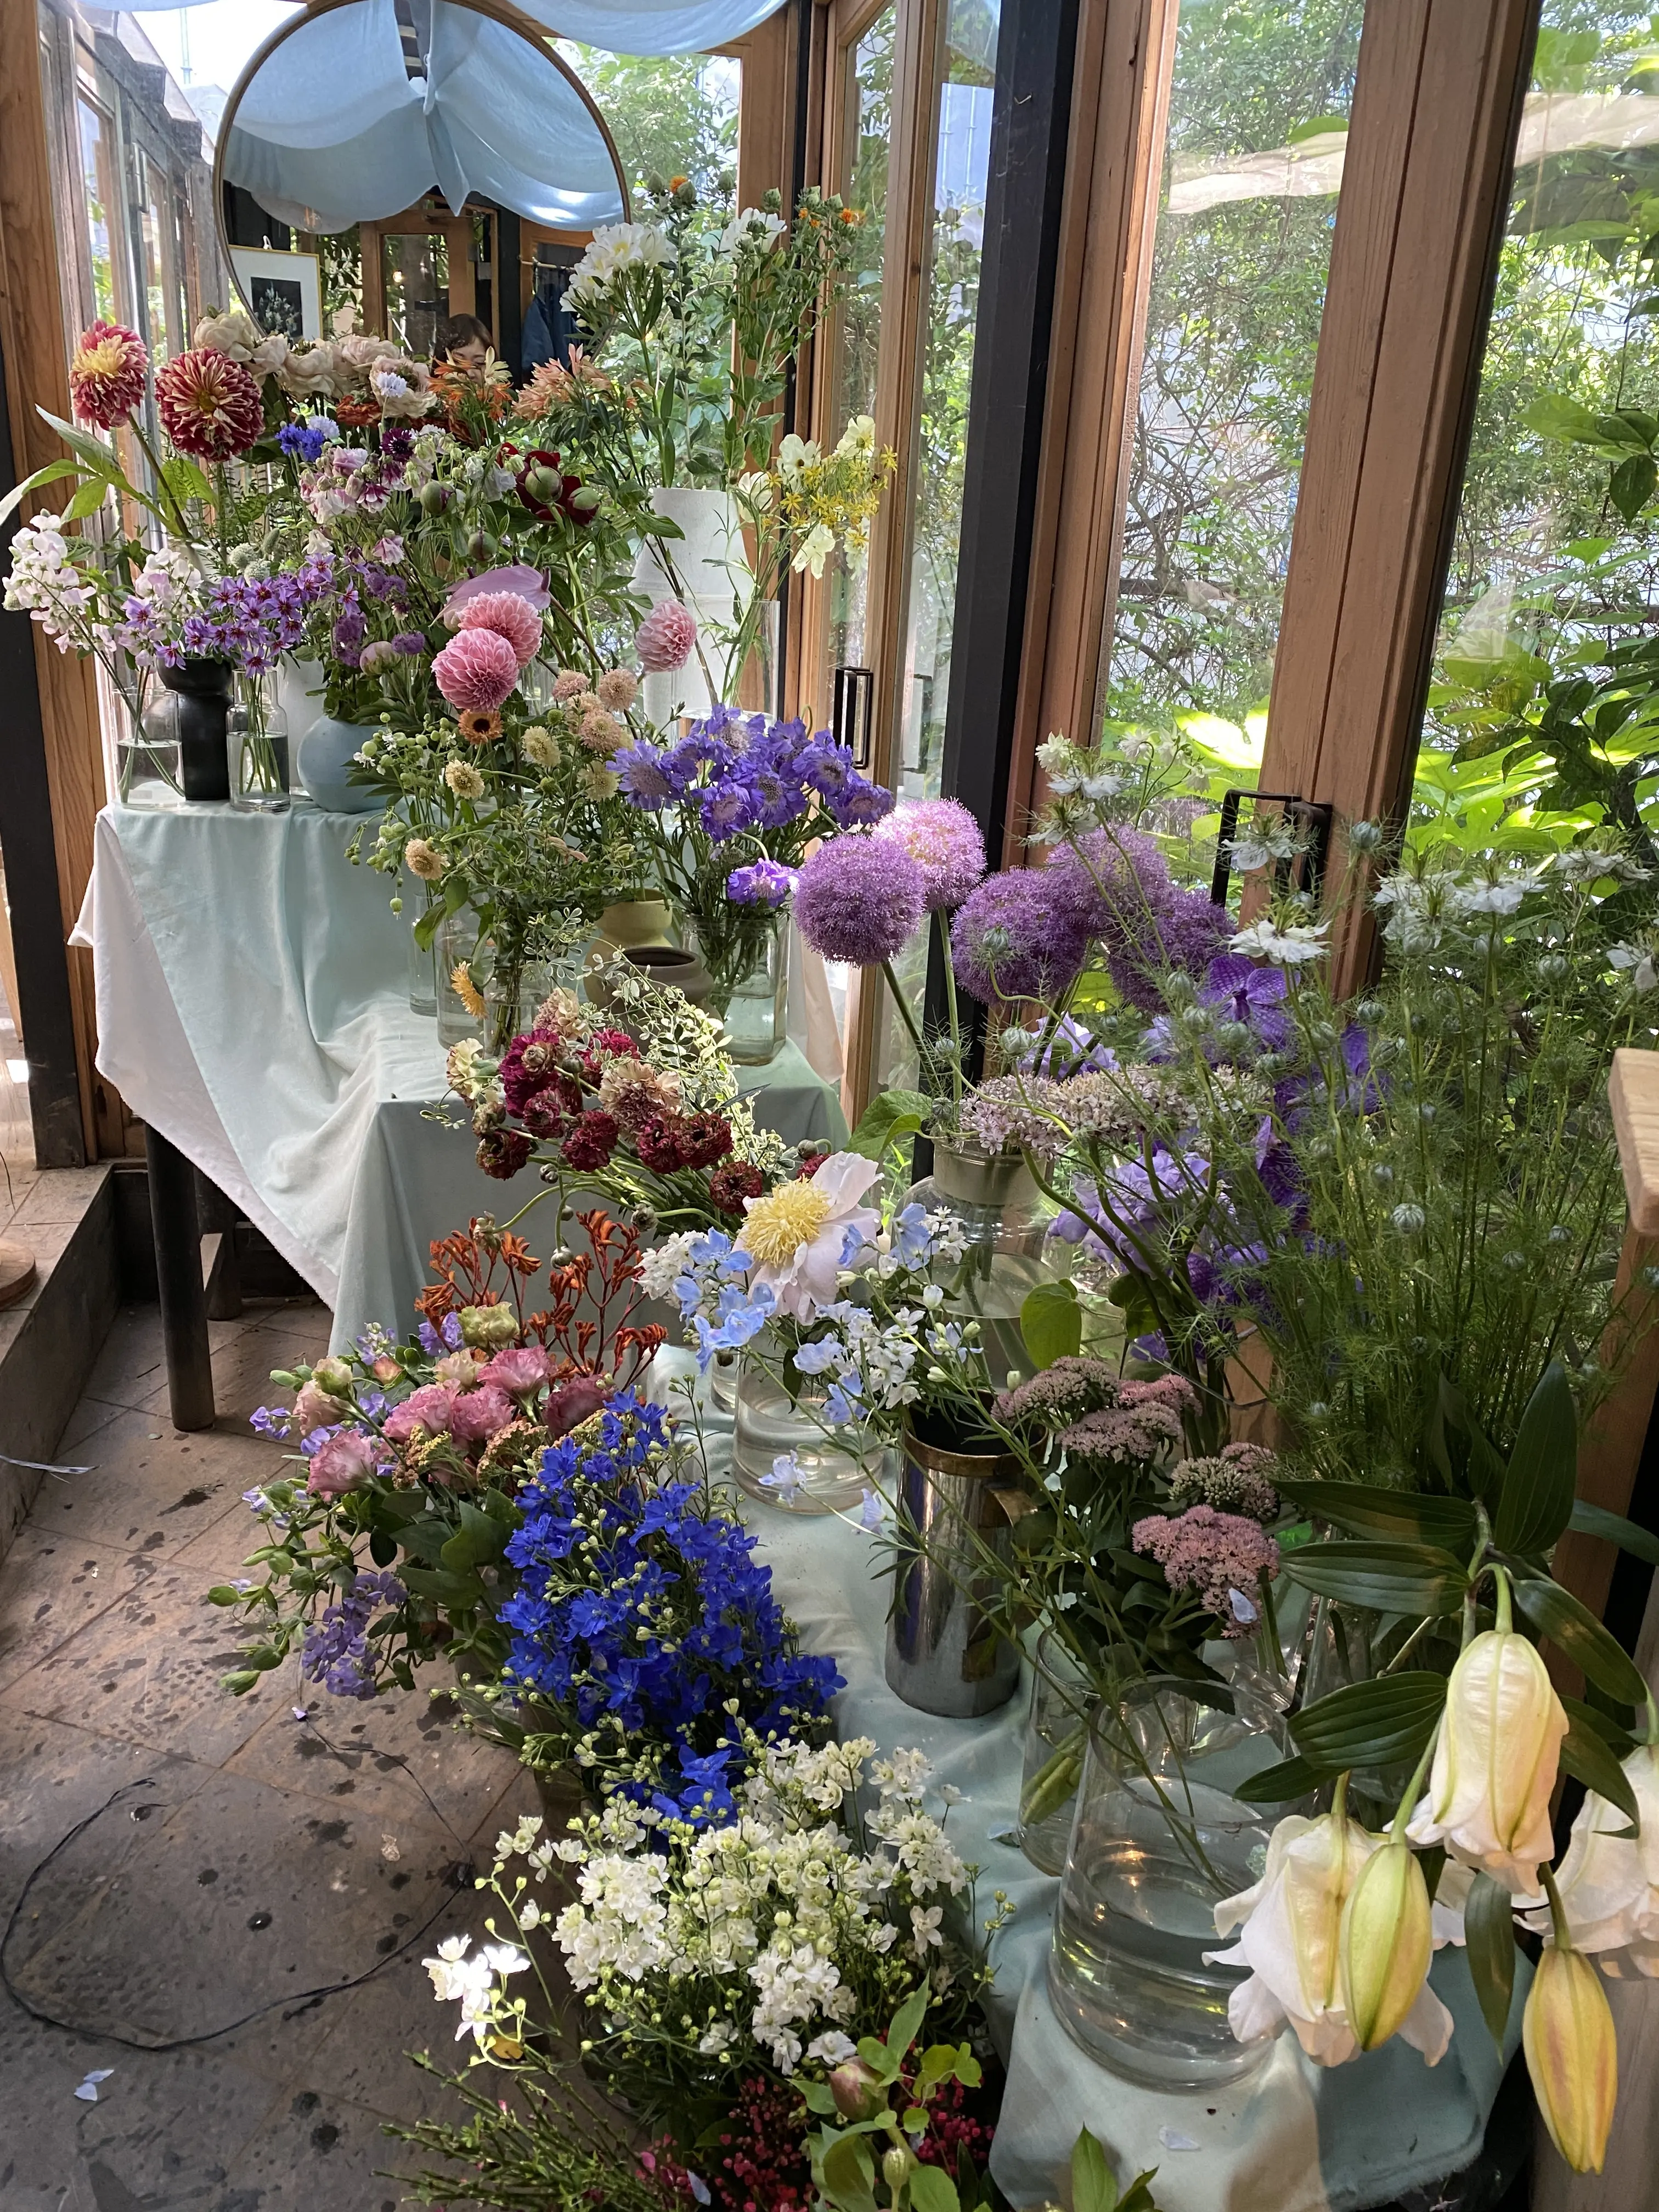 THE LITTLE SHOP OF FLOWERS